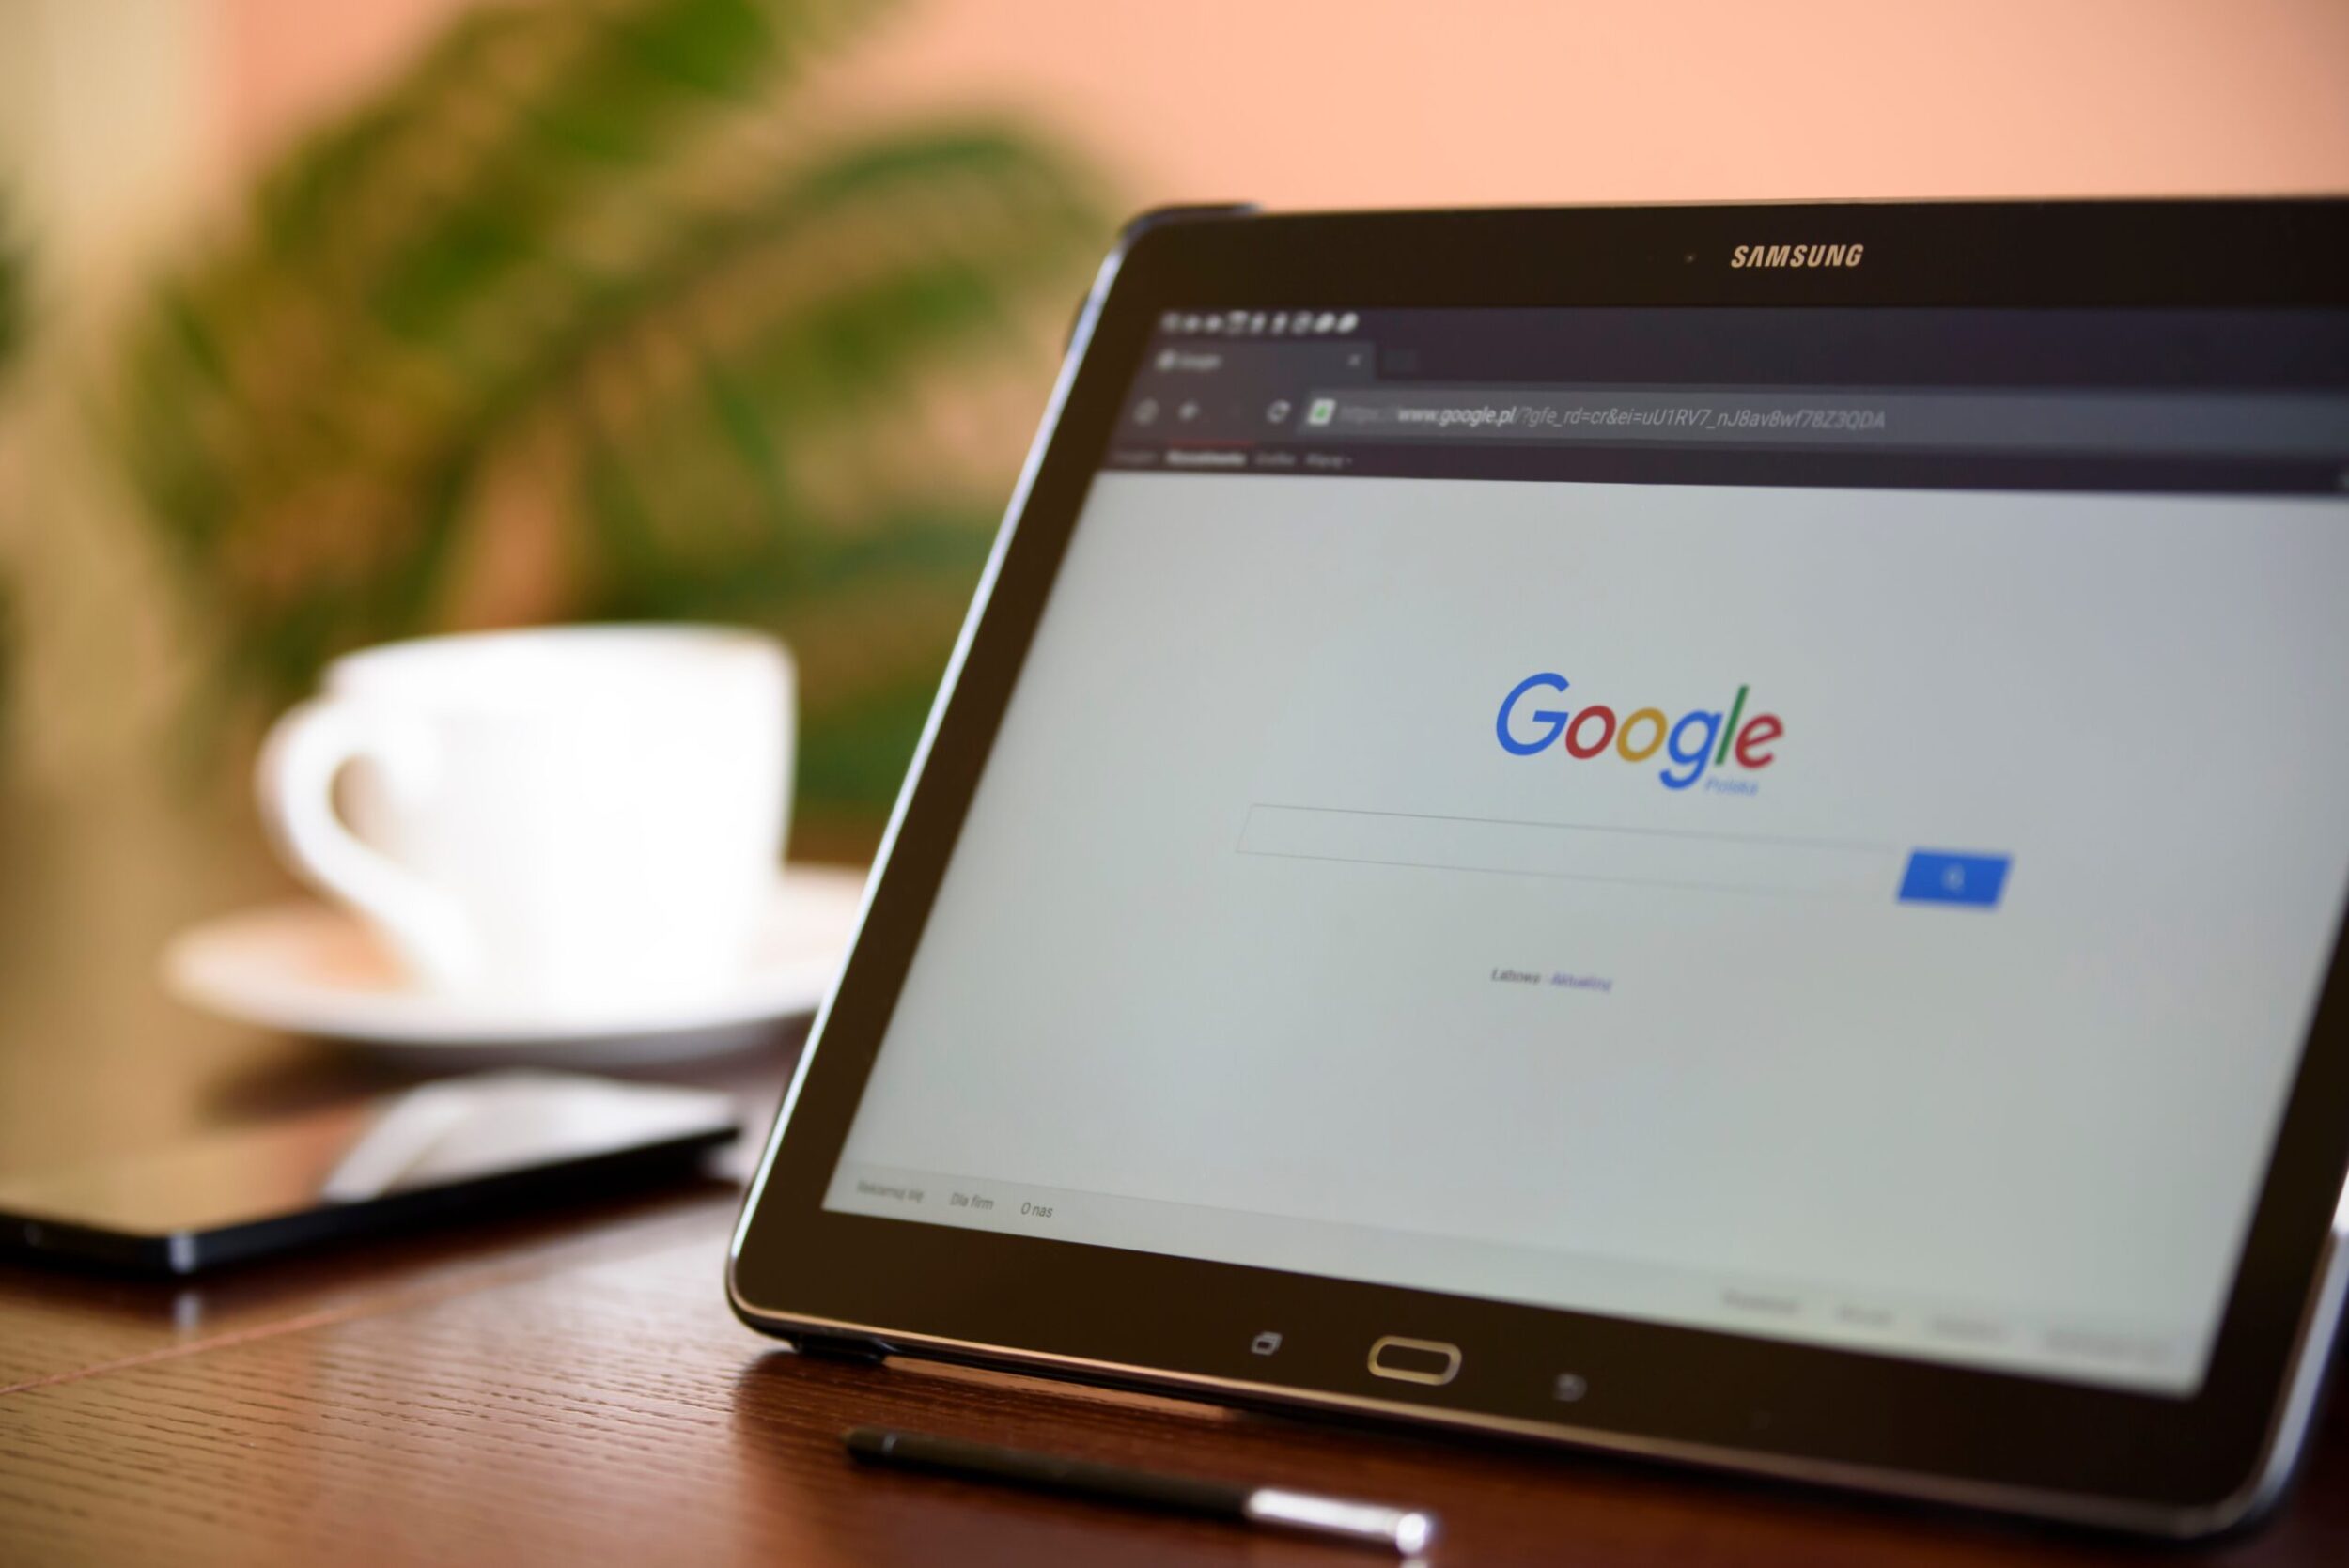 Google’s New Adwords: More Space, More Response & More Mobile